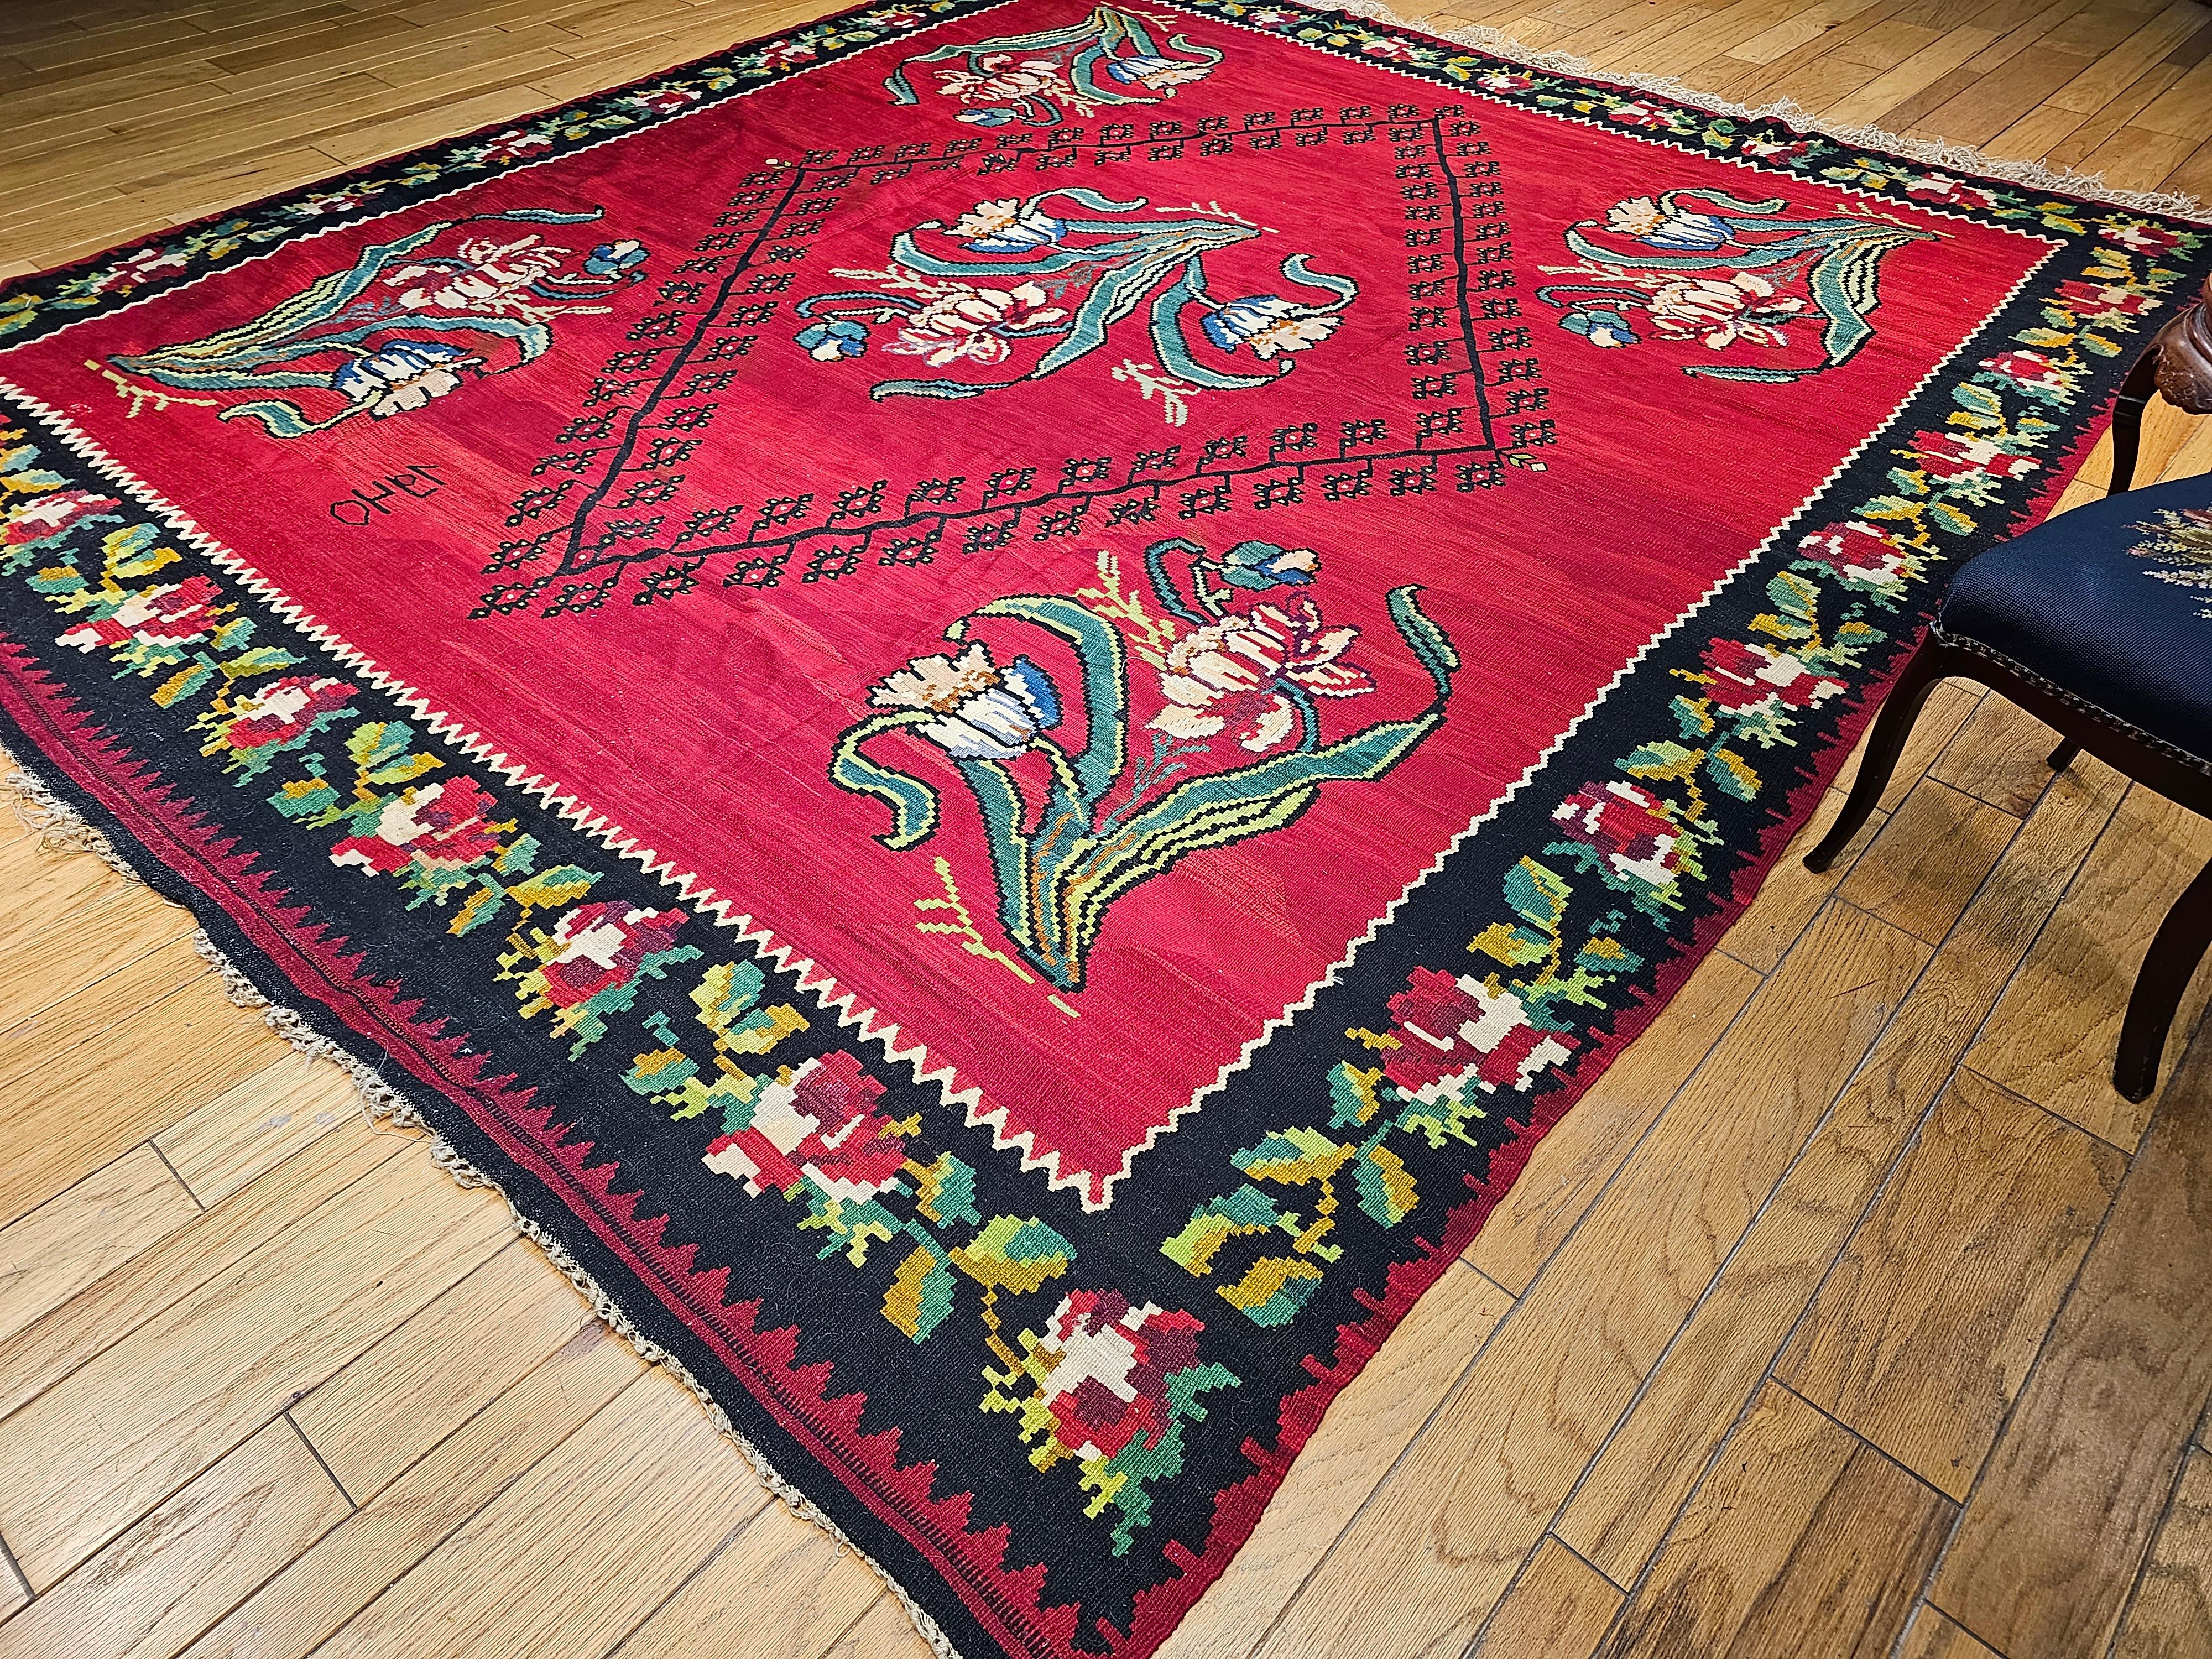 Vintage Bessarabian Kilim with Large Floral Pattern in Red, Black, Green, Blue For Sale 5